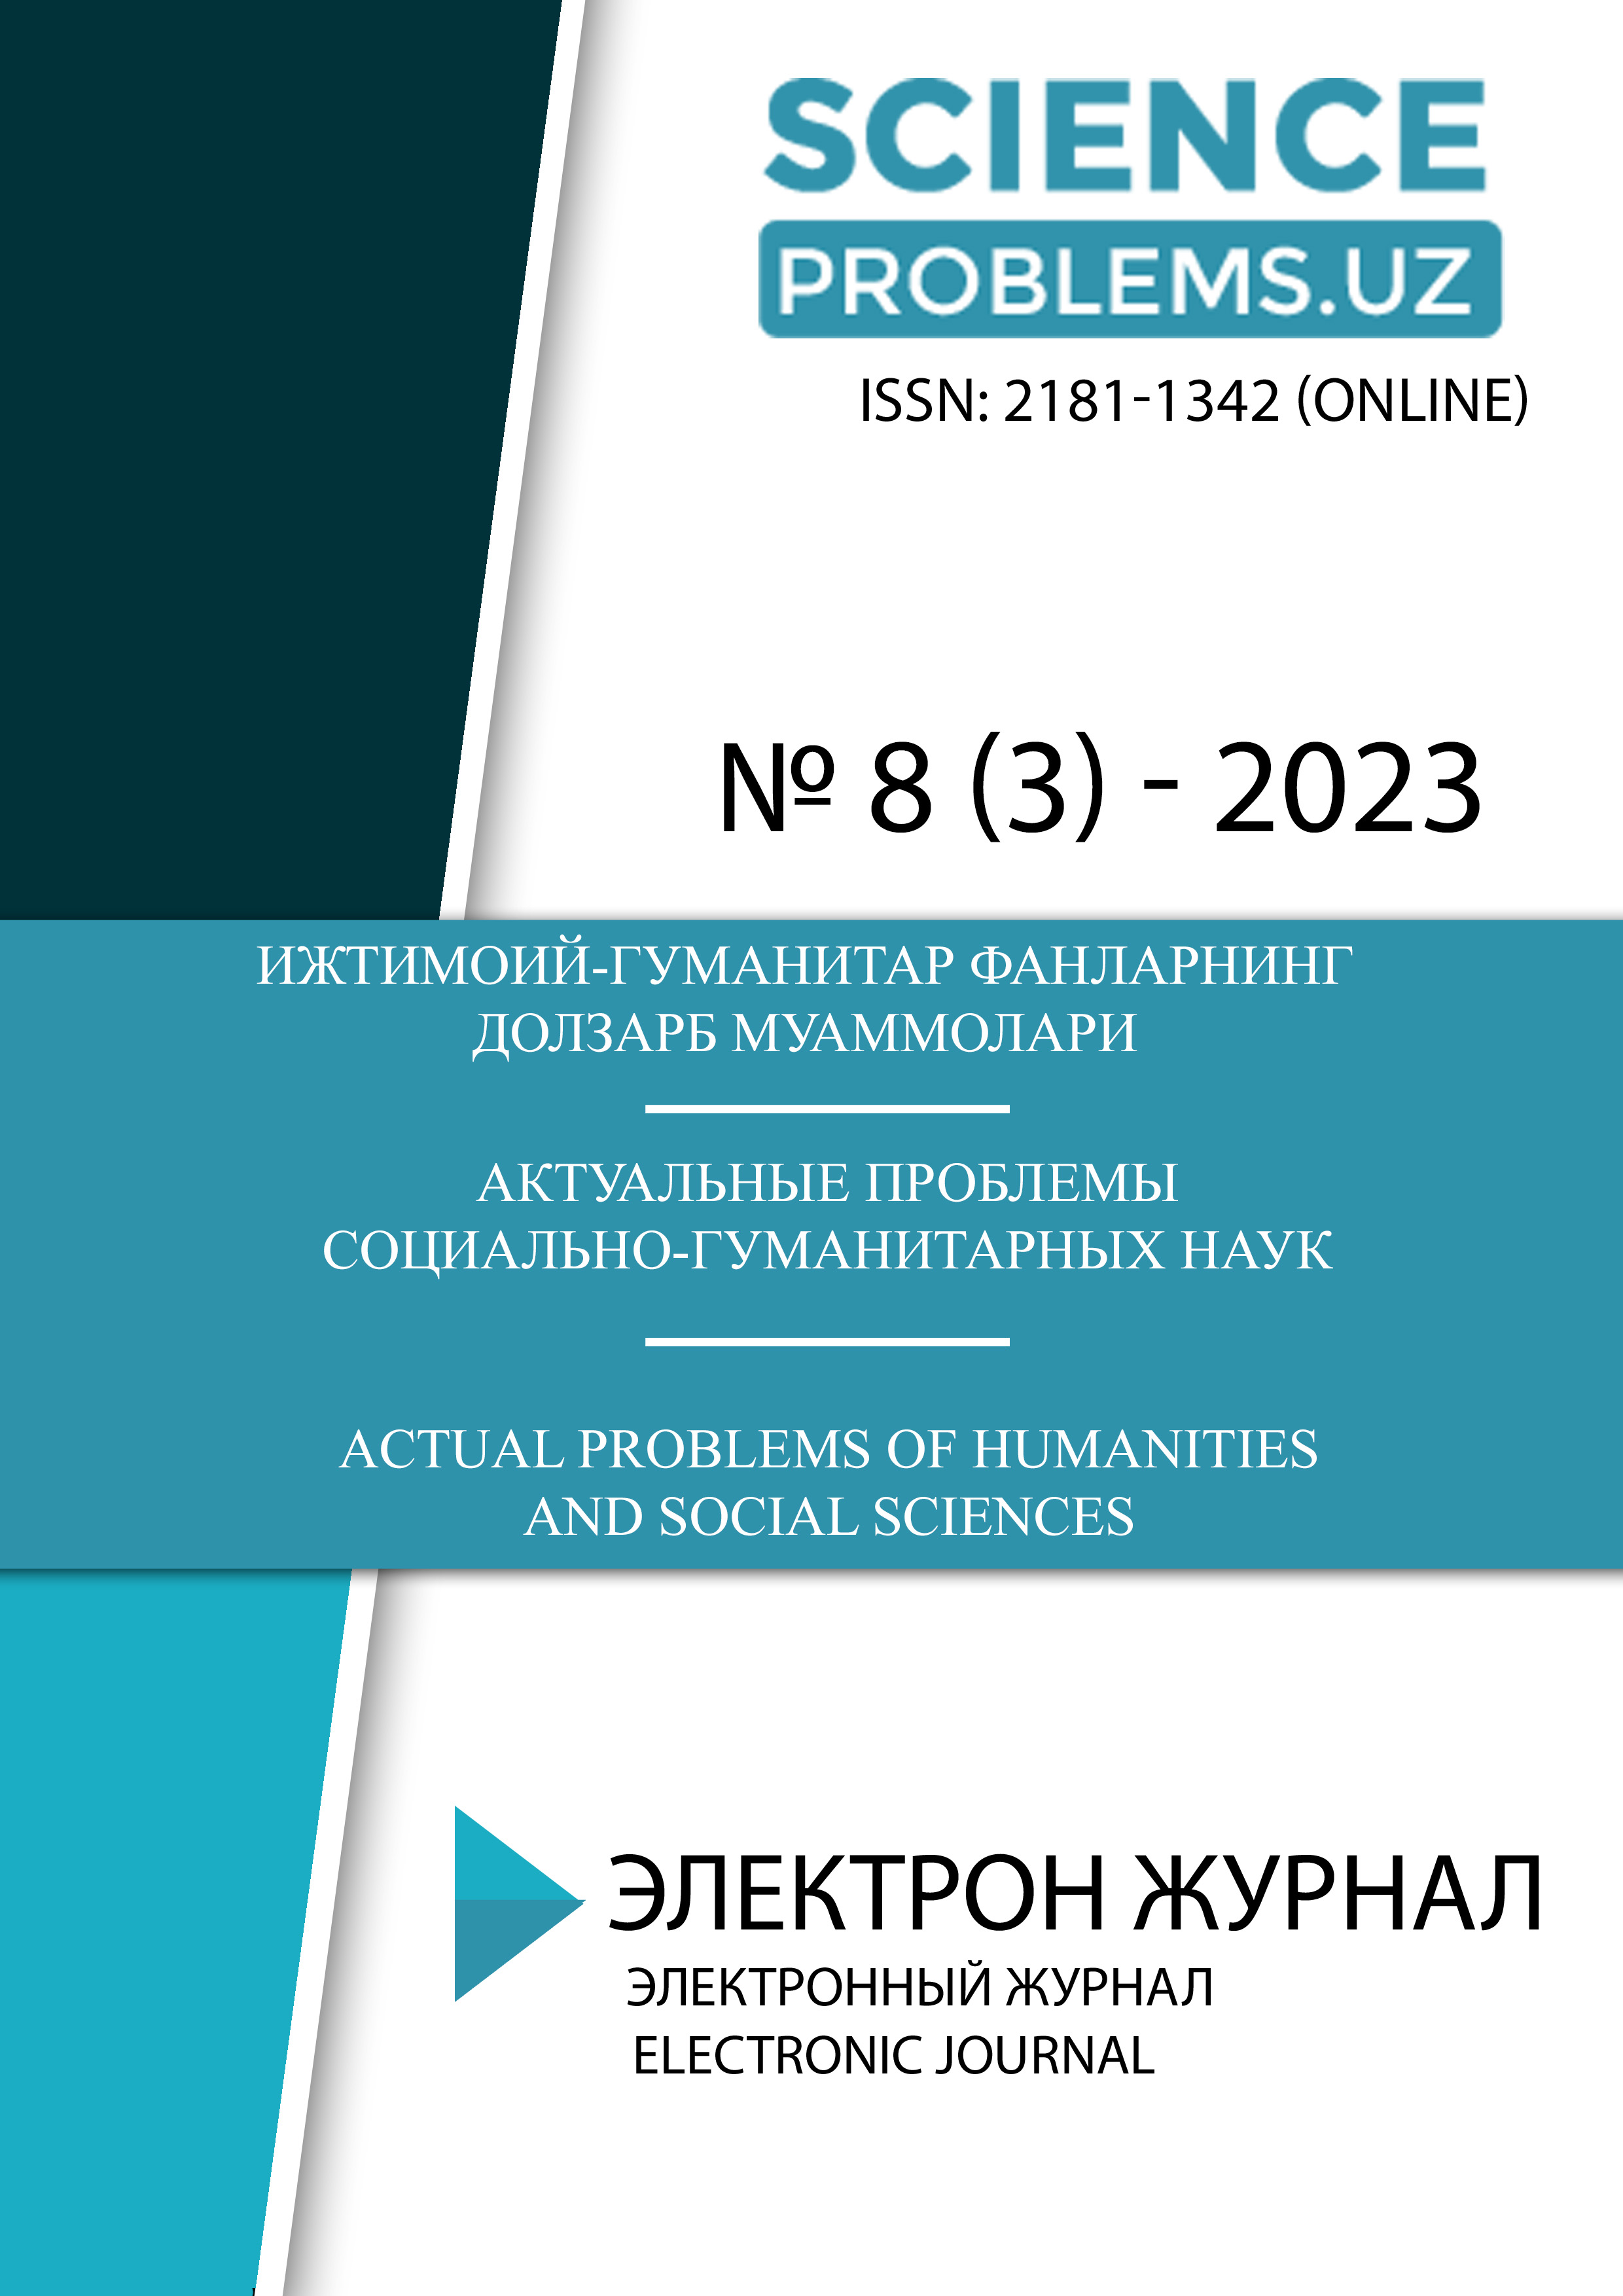 					View Vol. 3 No. 8 (2023): ACTUAL PROBLEMS OF HUMANITIES AND SOCIAL SCIENCES
				